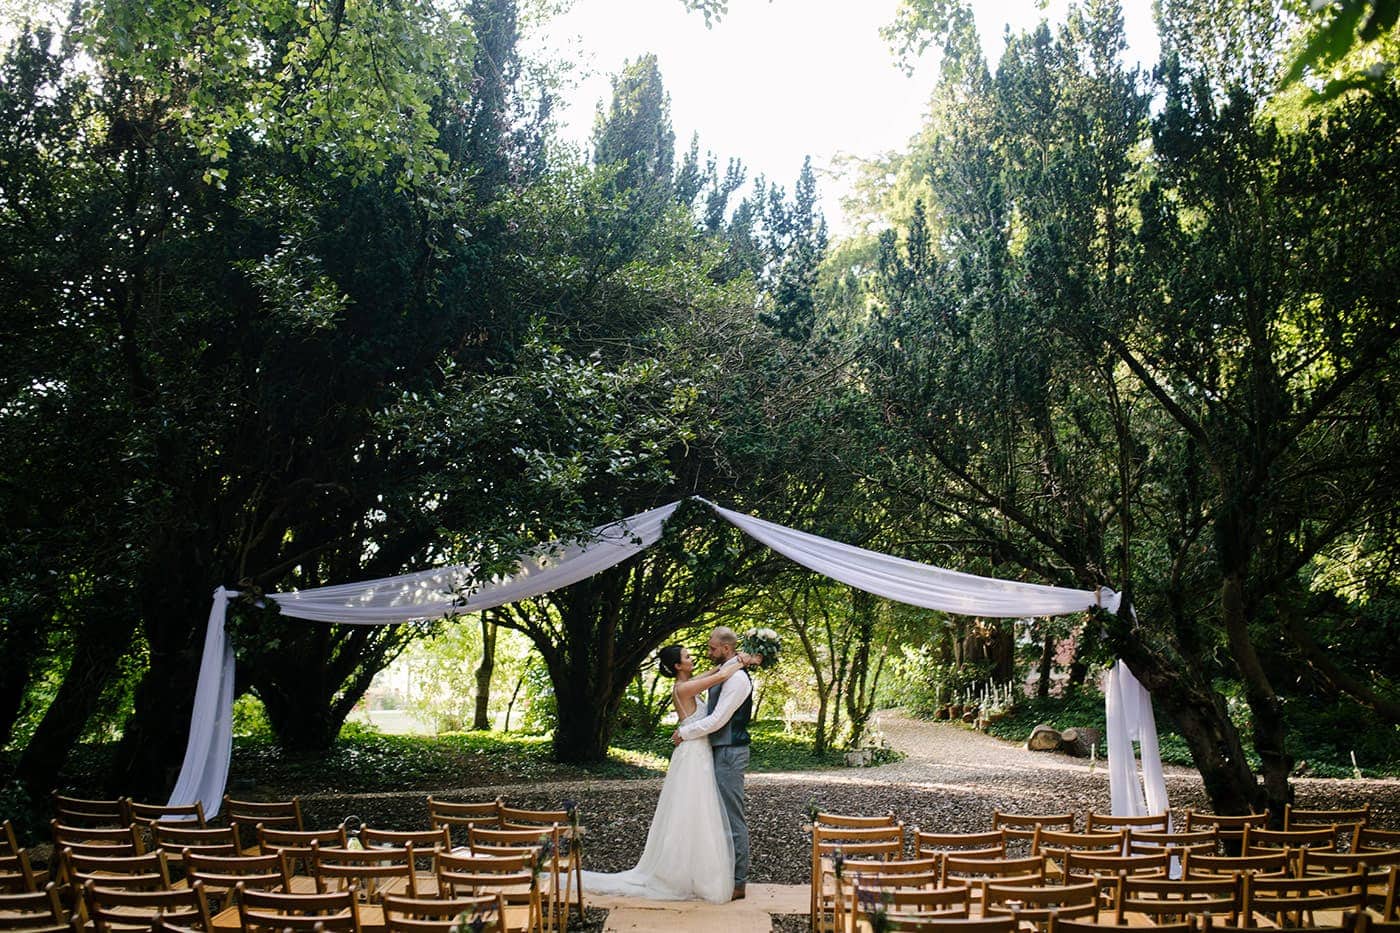 priory wedding photography offers heartfelt emotions like this outdoor ceremony